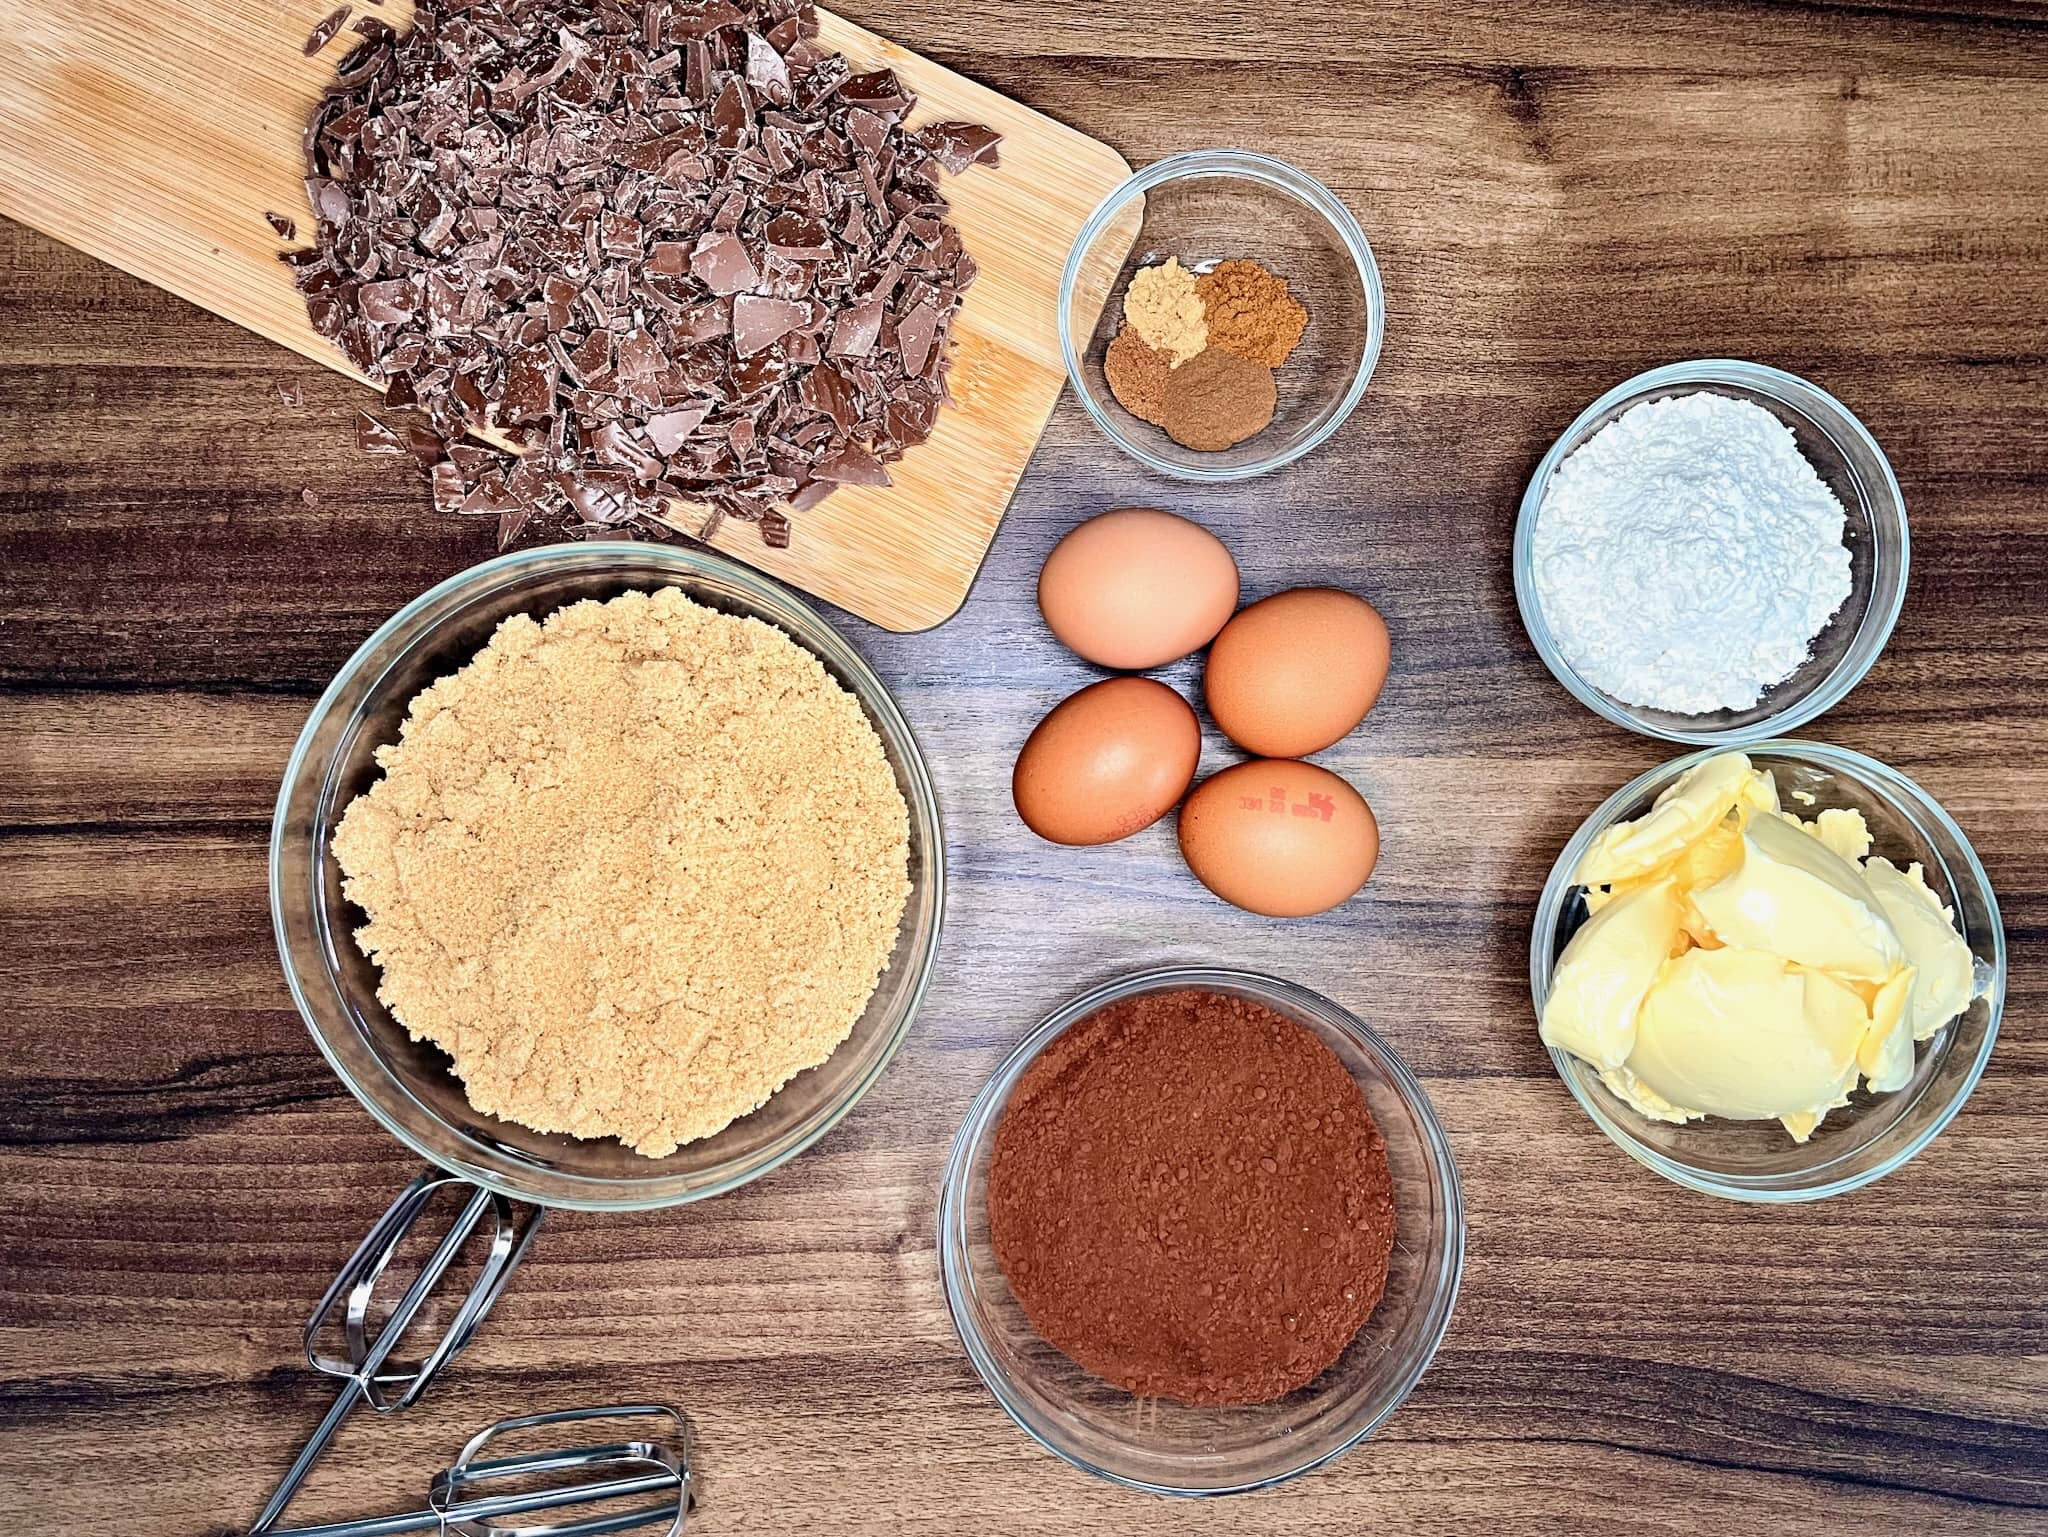 Assembling all the ingredients on the tabletop in preparation for baking a gingerbread brownie